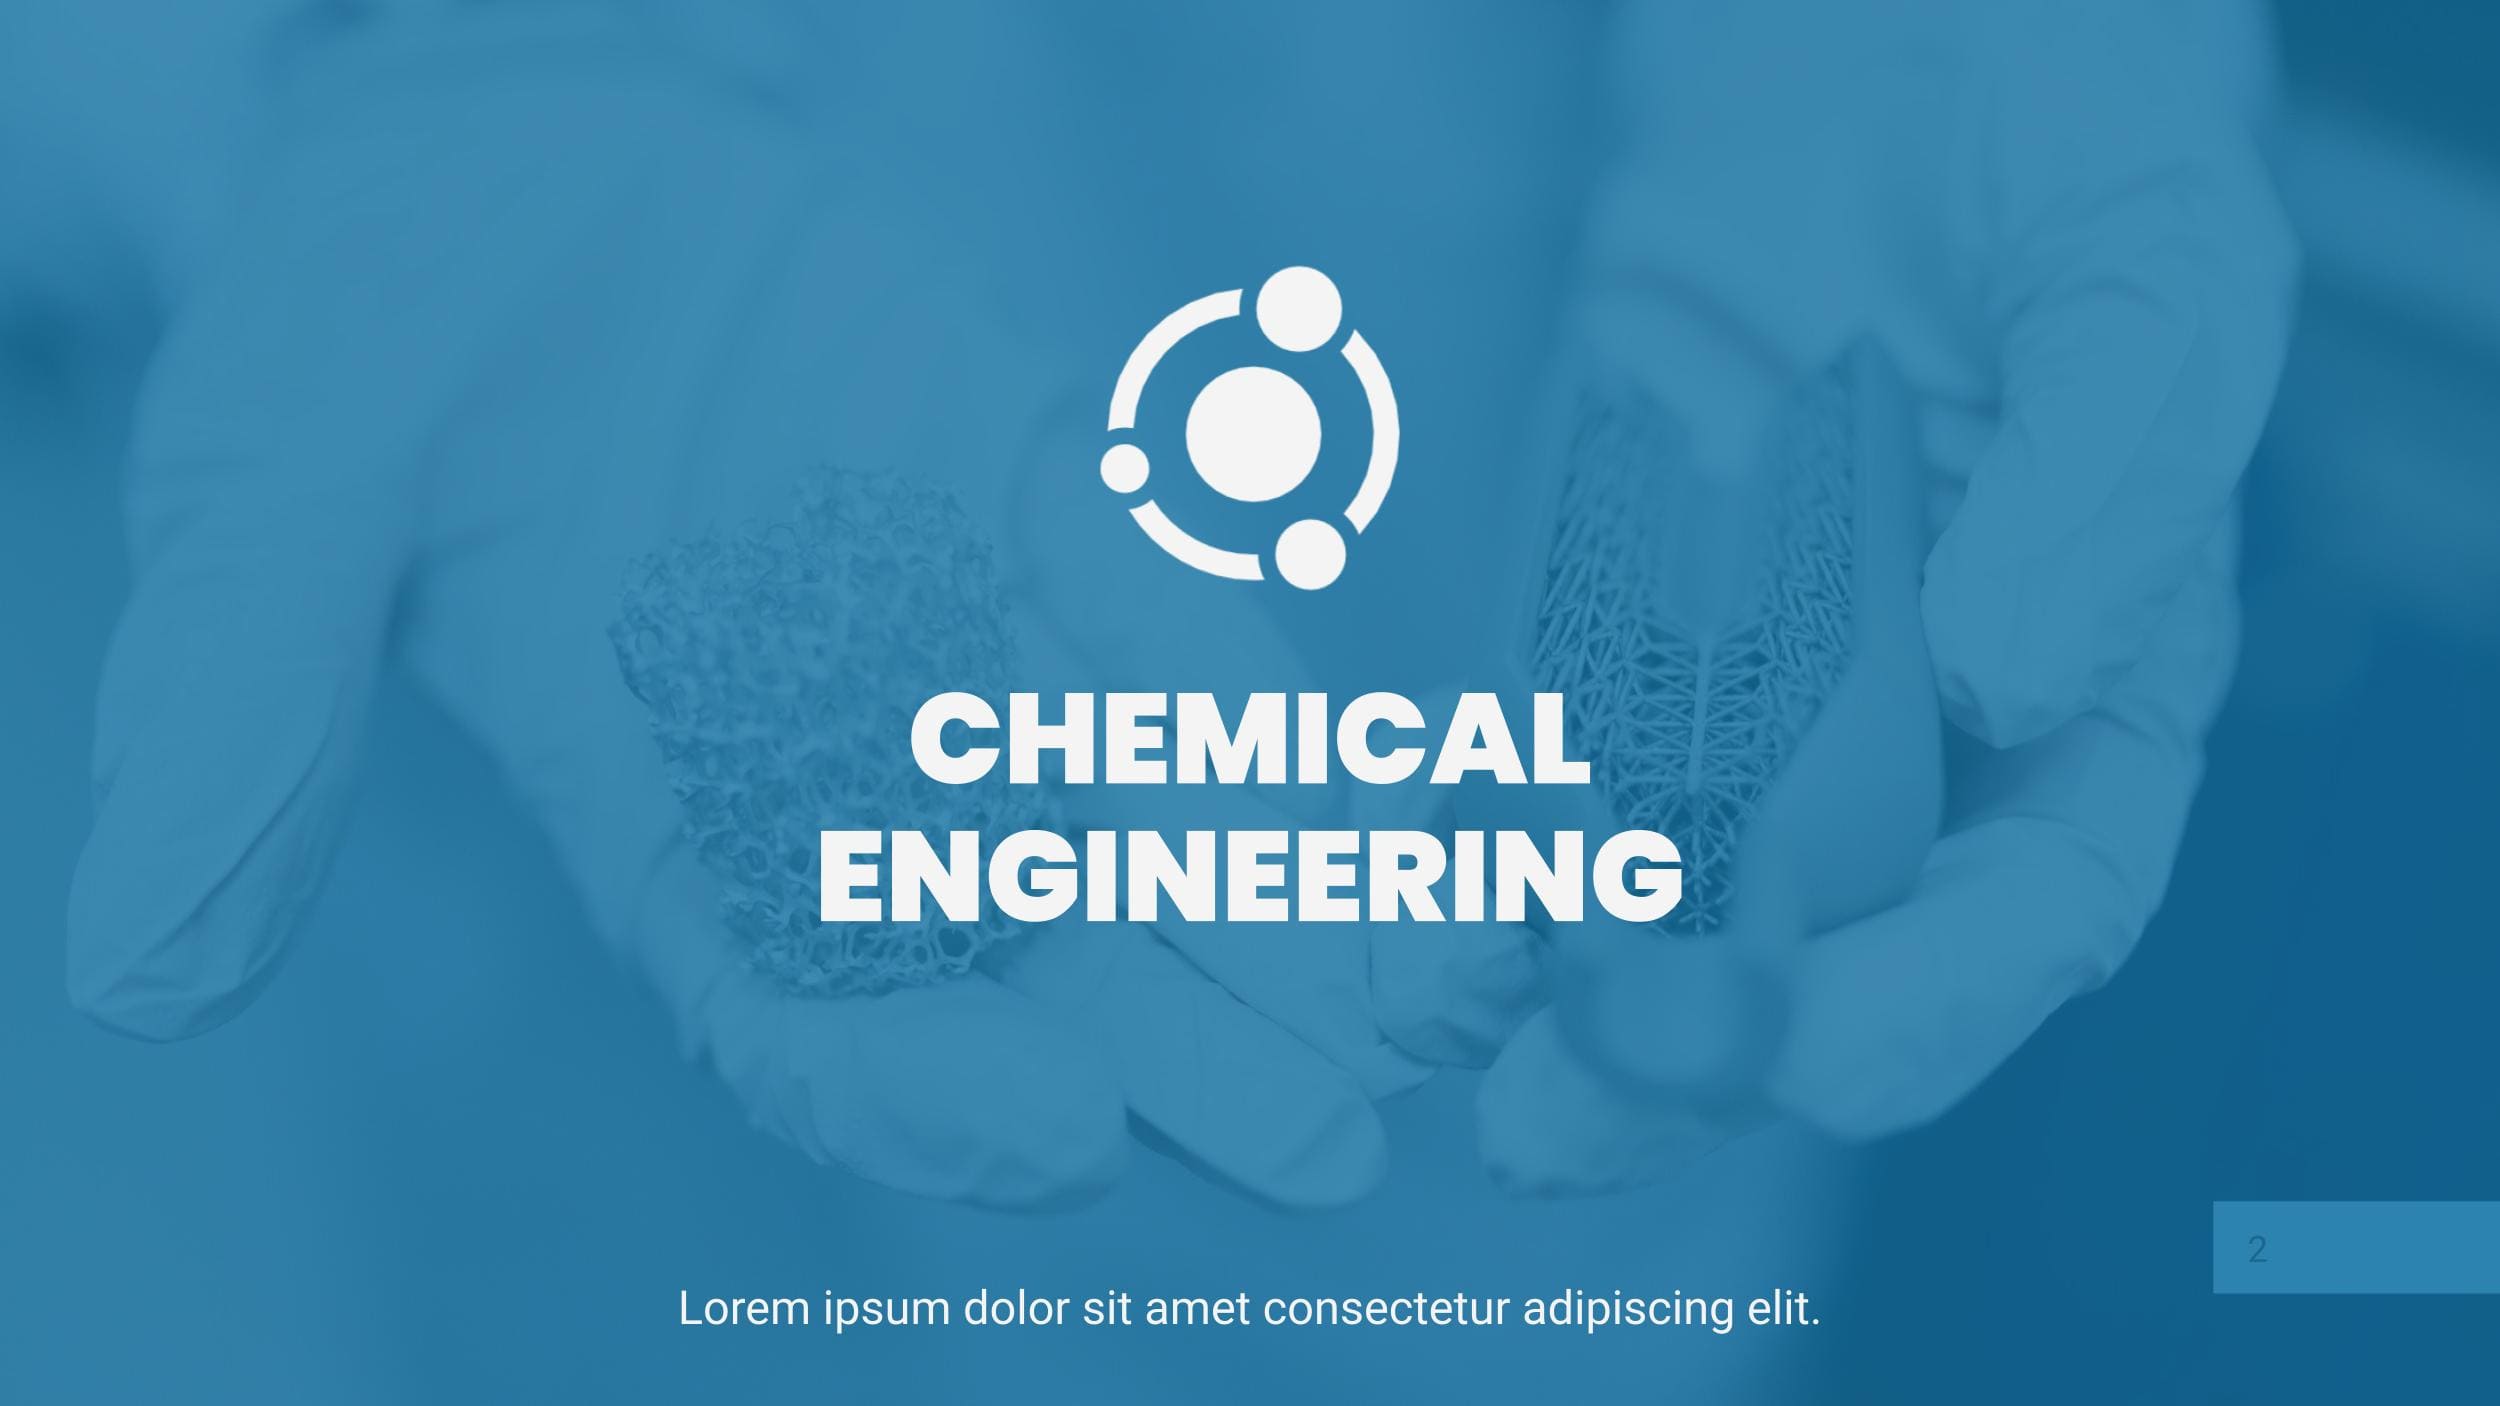 Chemical Engineering Logo designs, themes, templates and downloadable  graphic elements on Dribbble